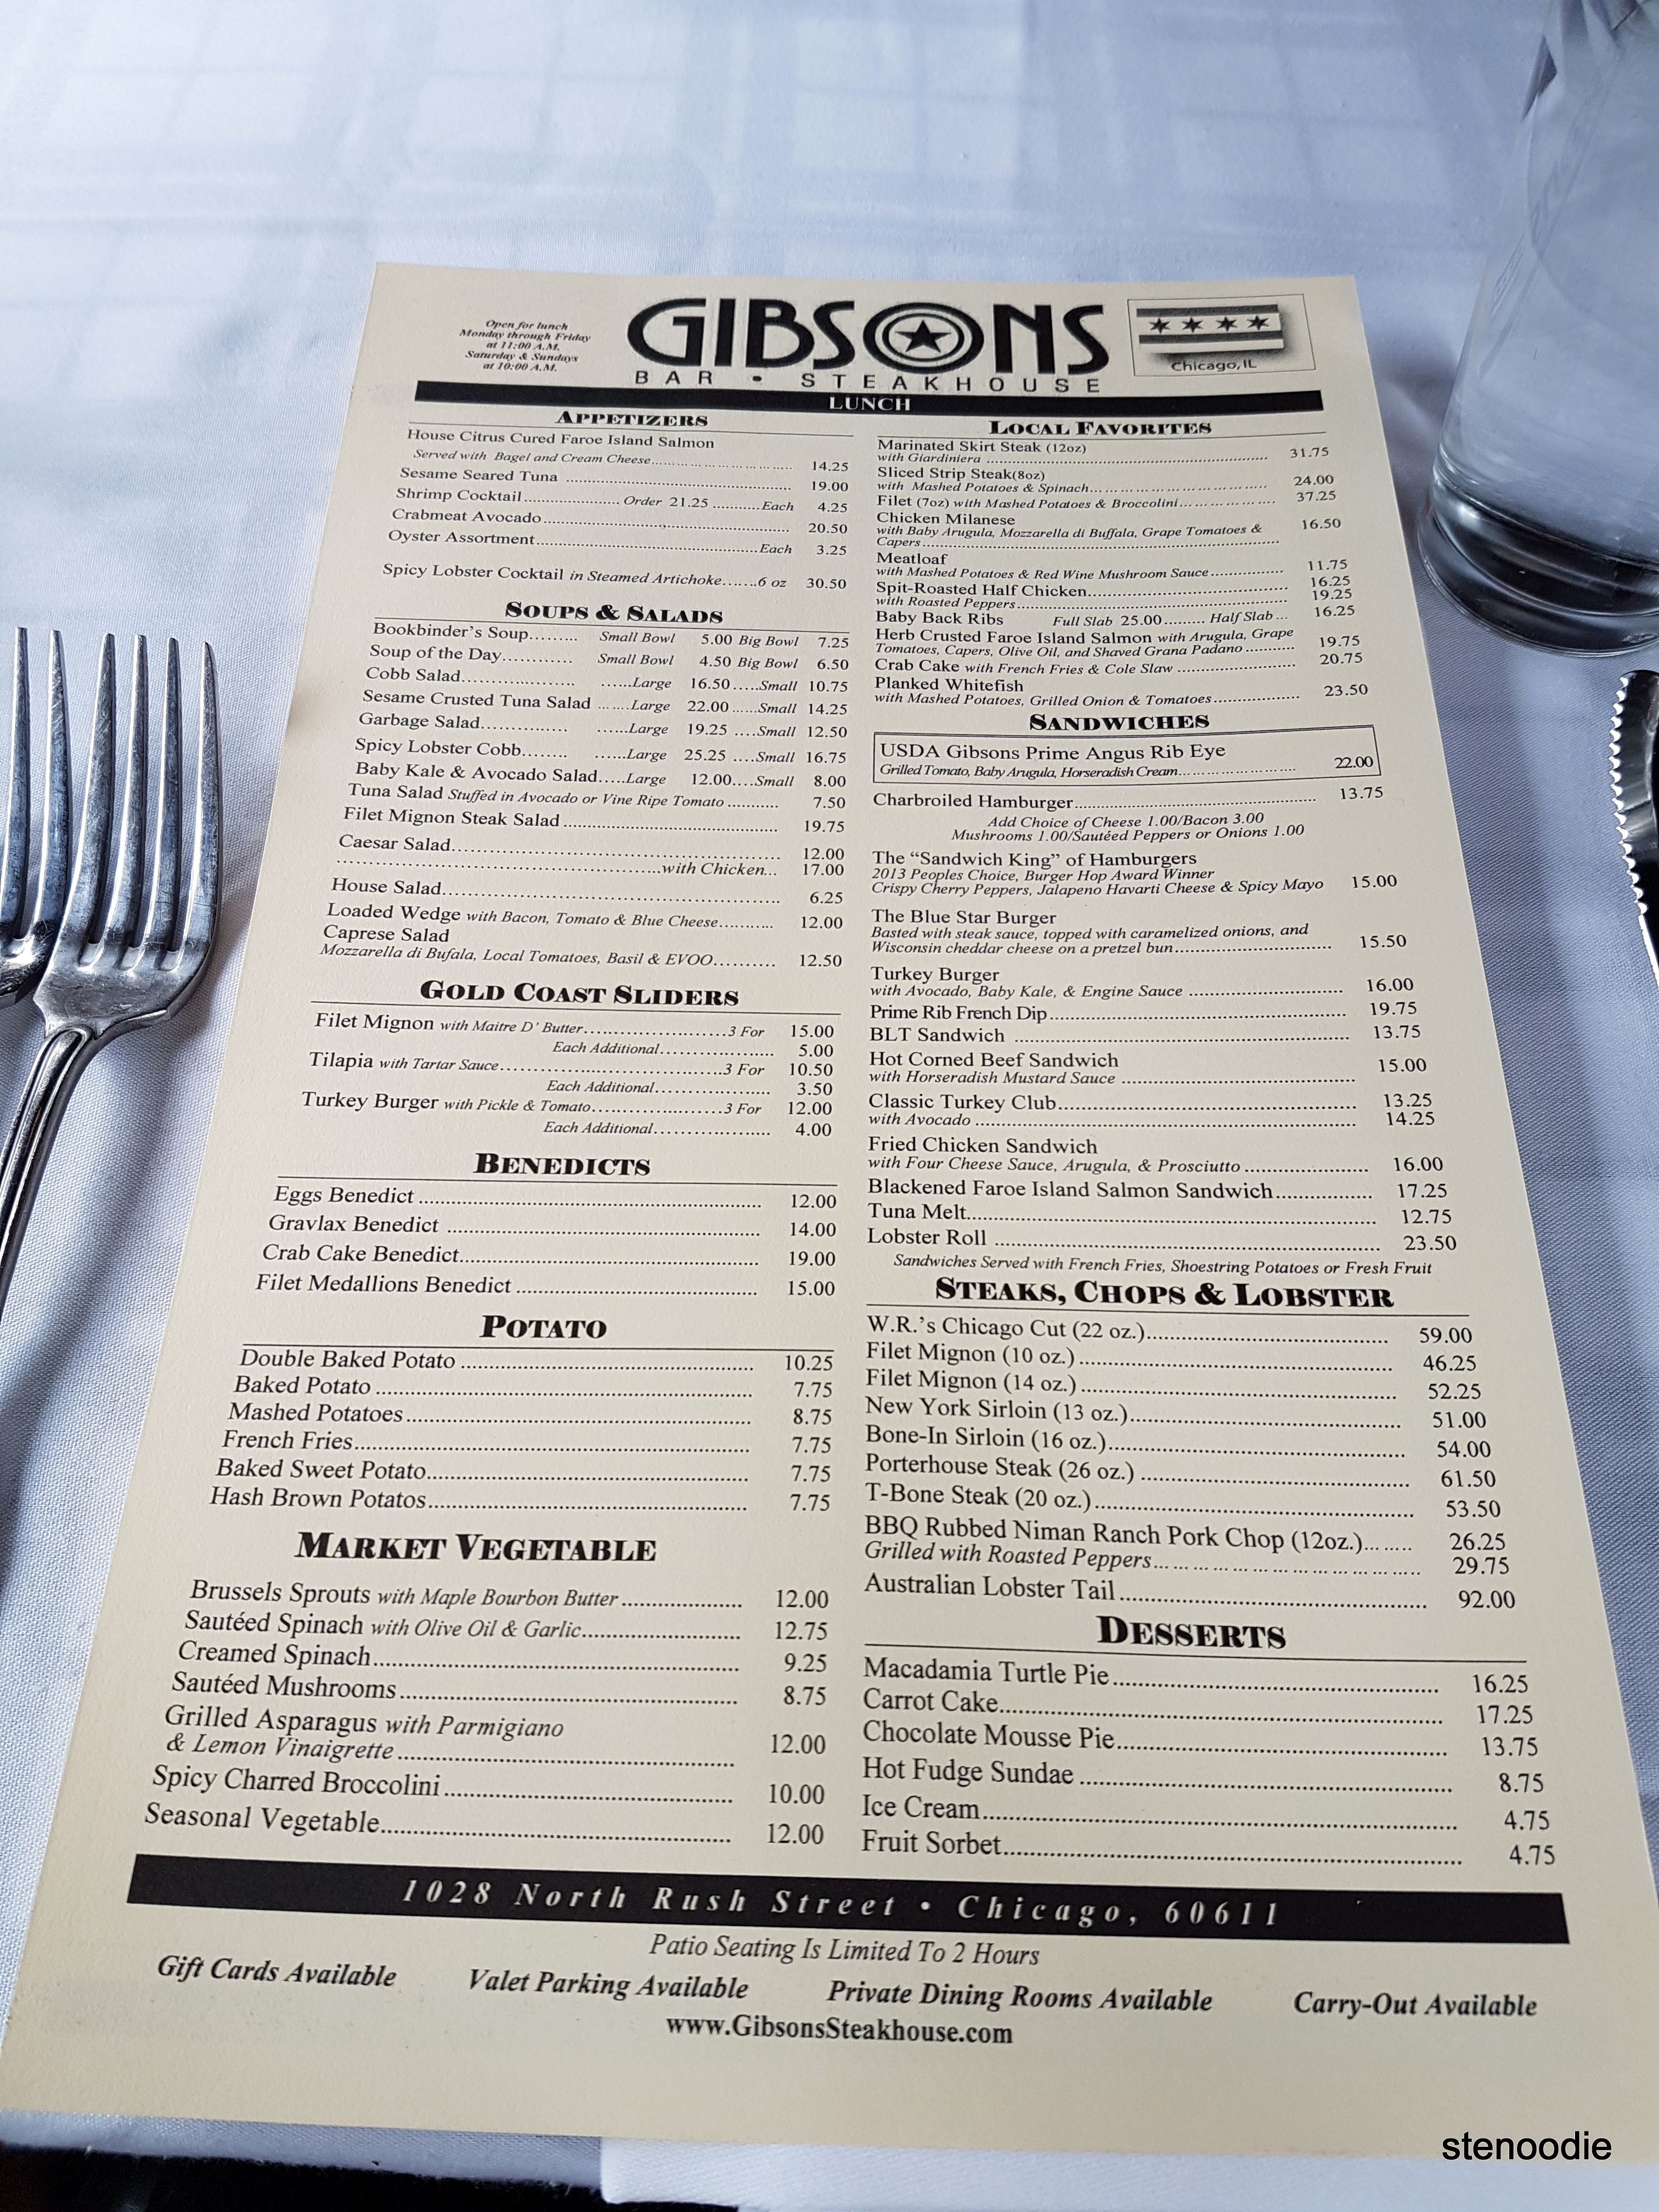  Gibson's Bar and Steakhouse menu and prices